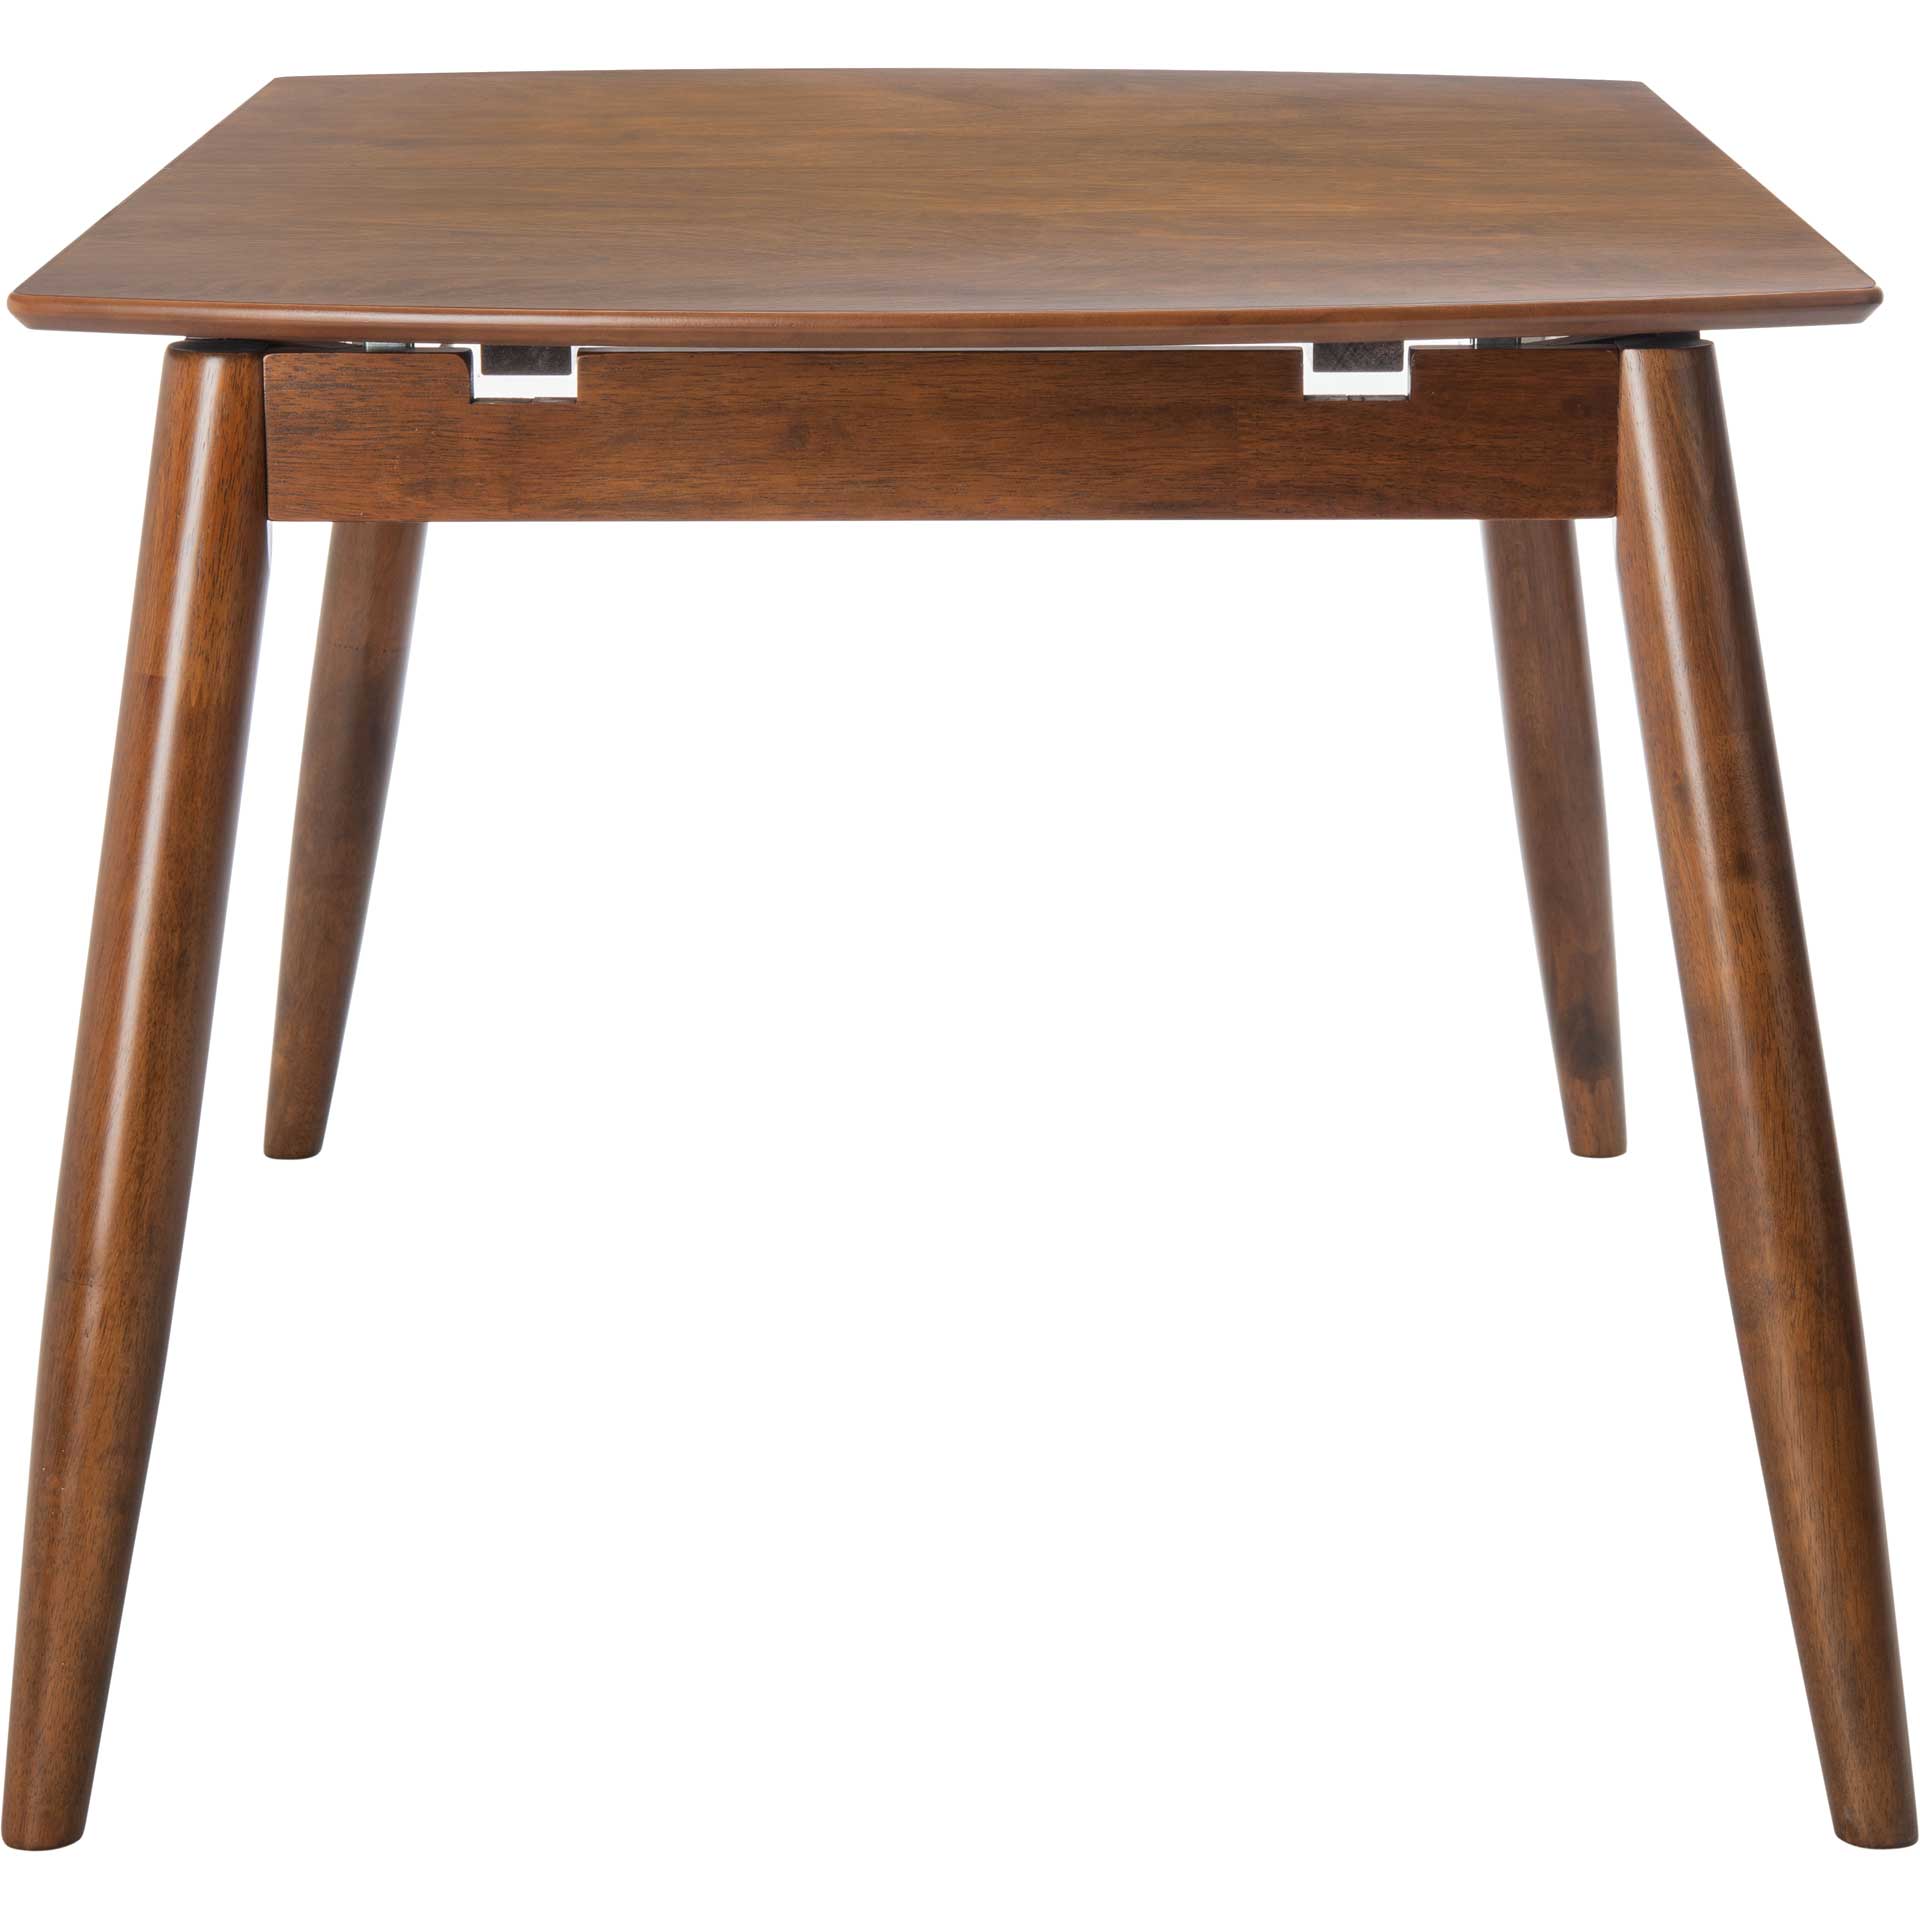 Kylie Auto Mechanism Extension Dining Table Walnut